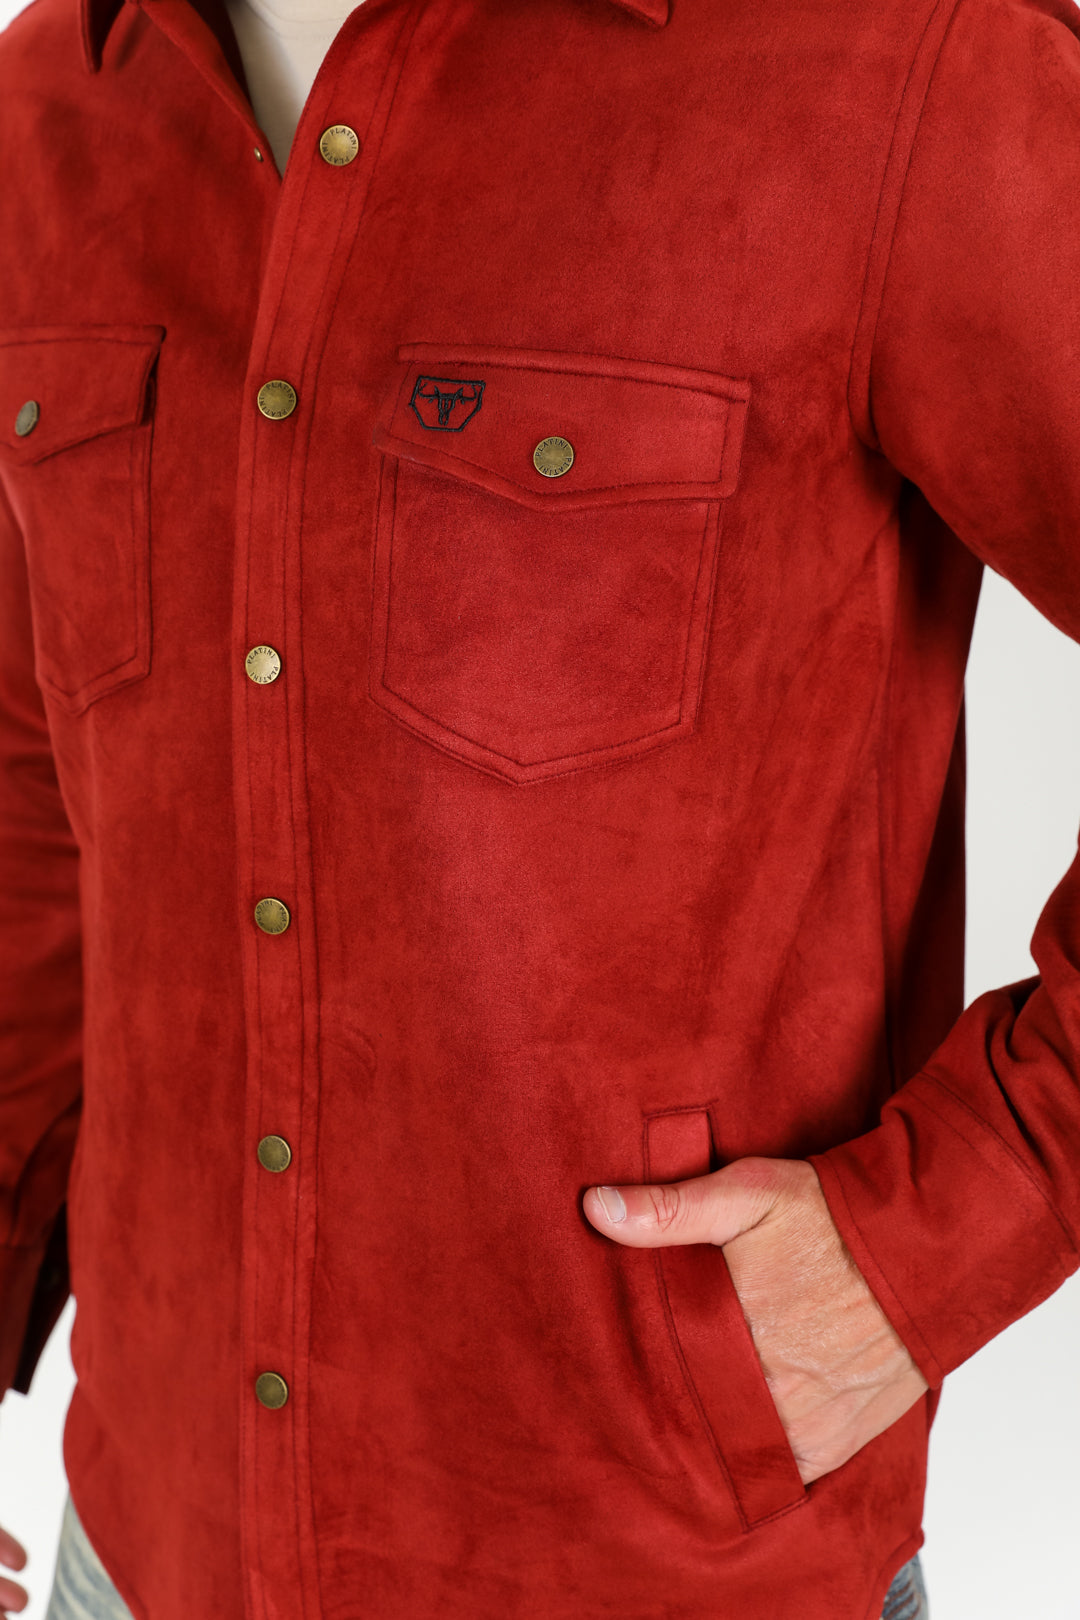 Men's Faux Suede Overshirt - Red